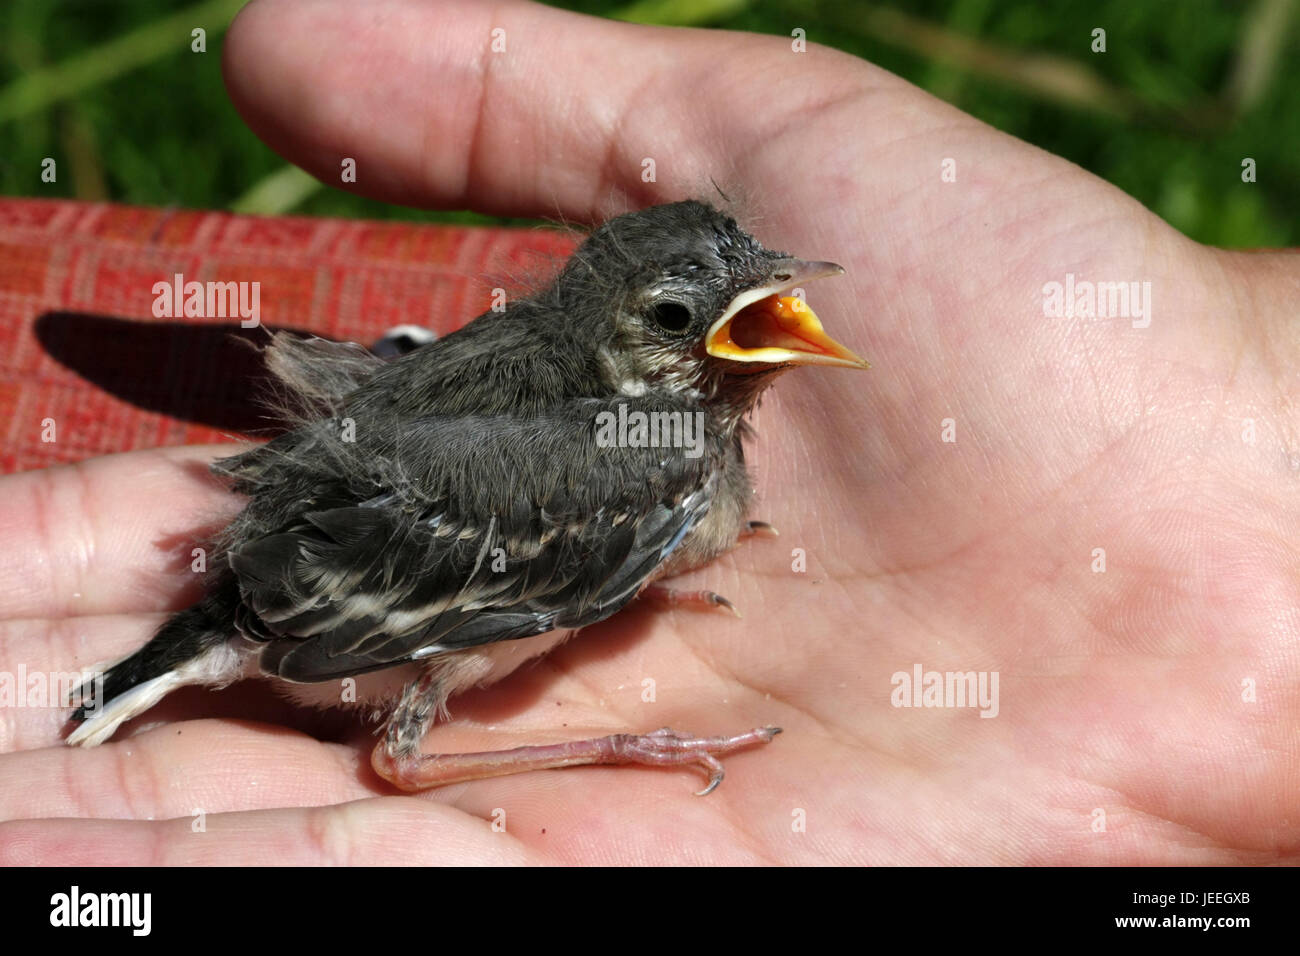 Nestling Wagtails sitting on the palm of your hand and shouts,widely opening the mouth yellow. Stock Photo